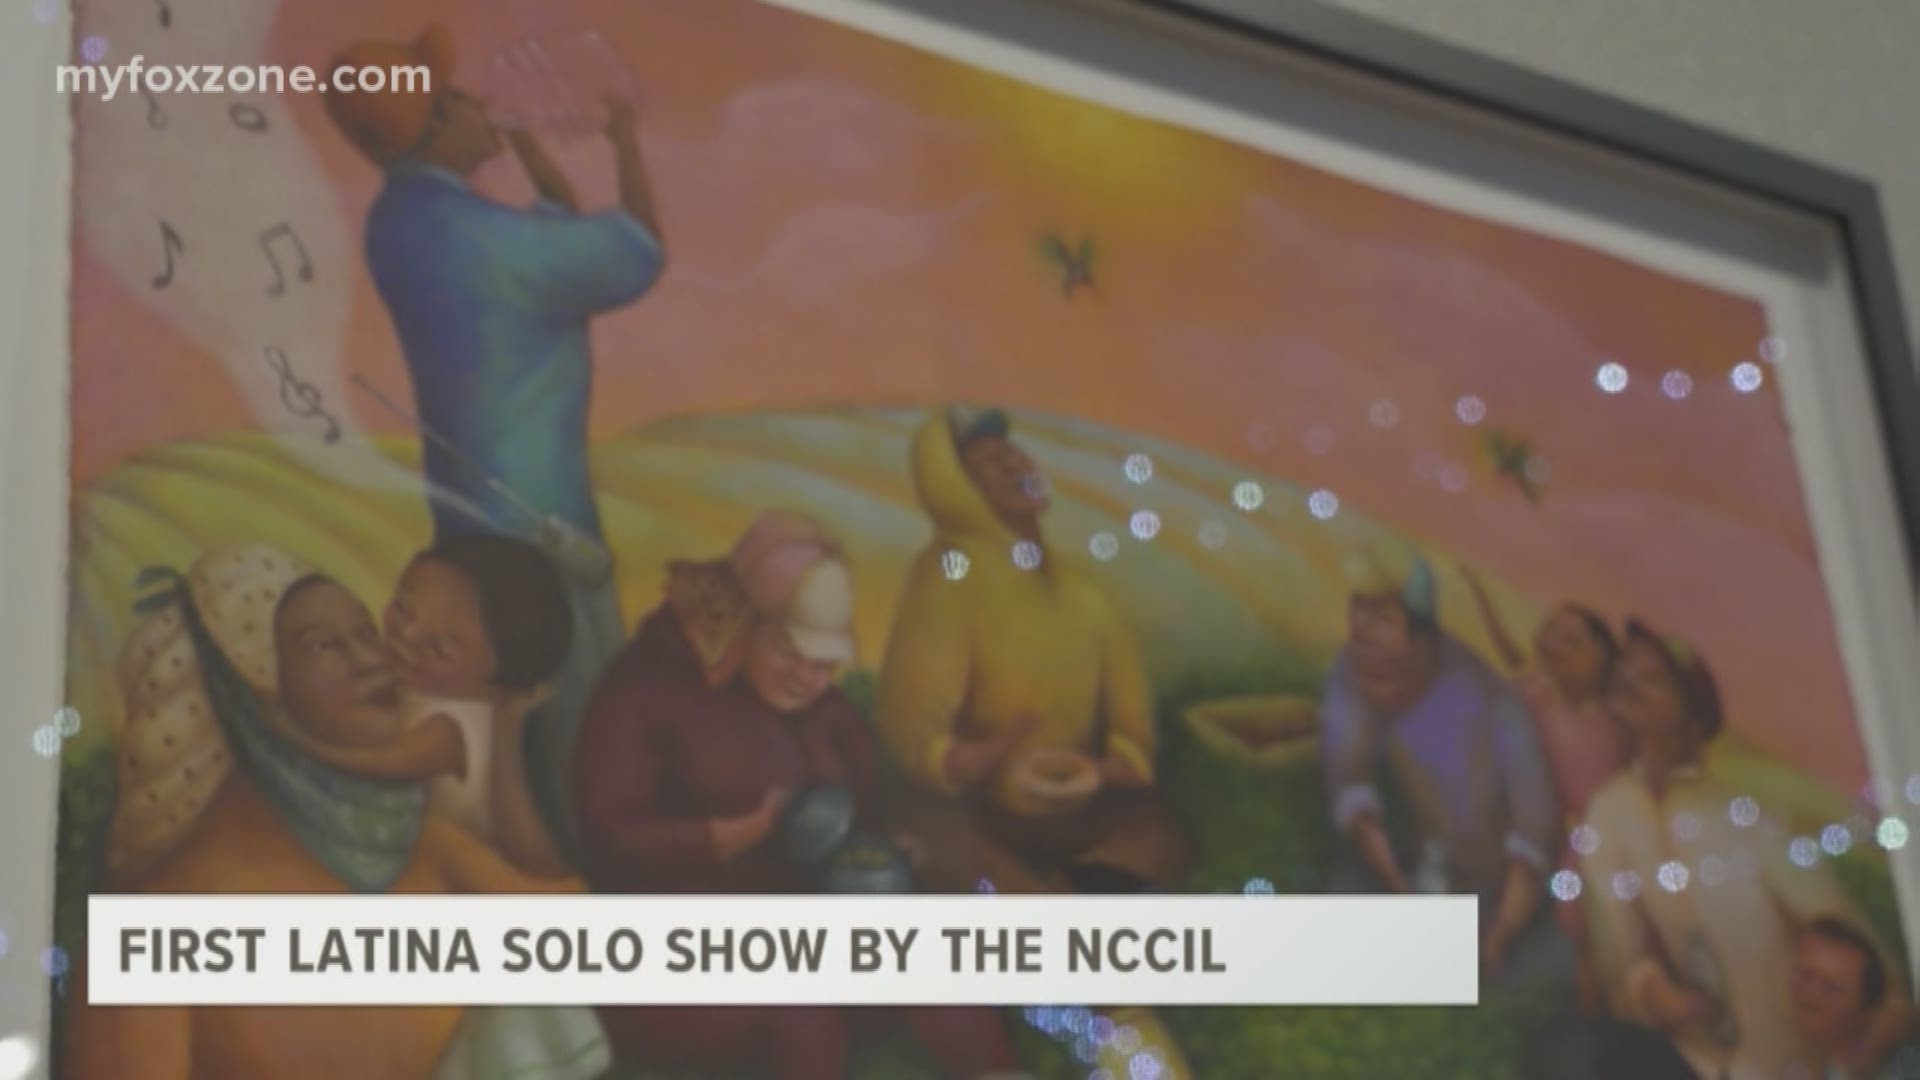 The Story Book Capital of America presents their first Latina solo exhibition at the NCCIL.